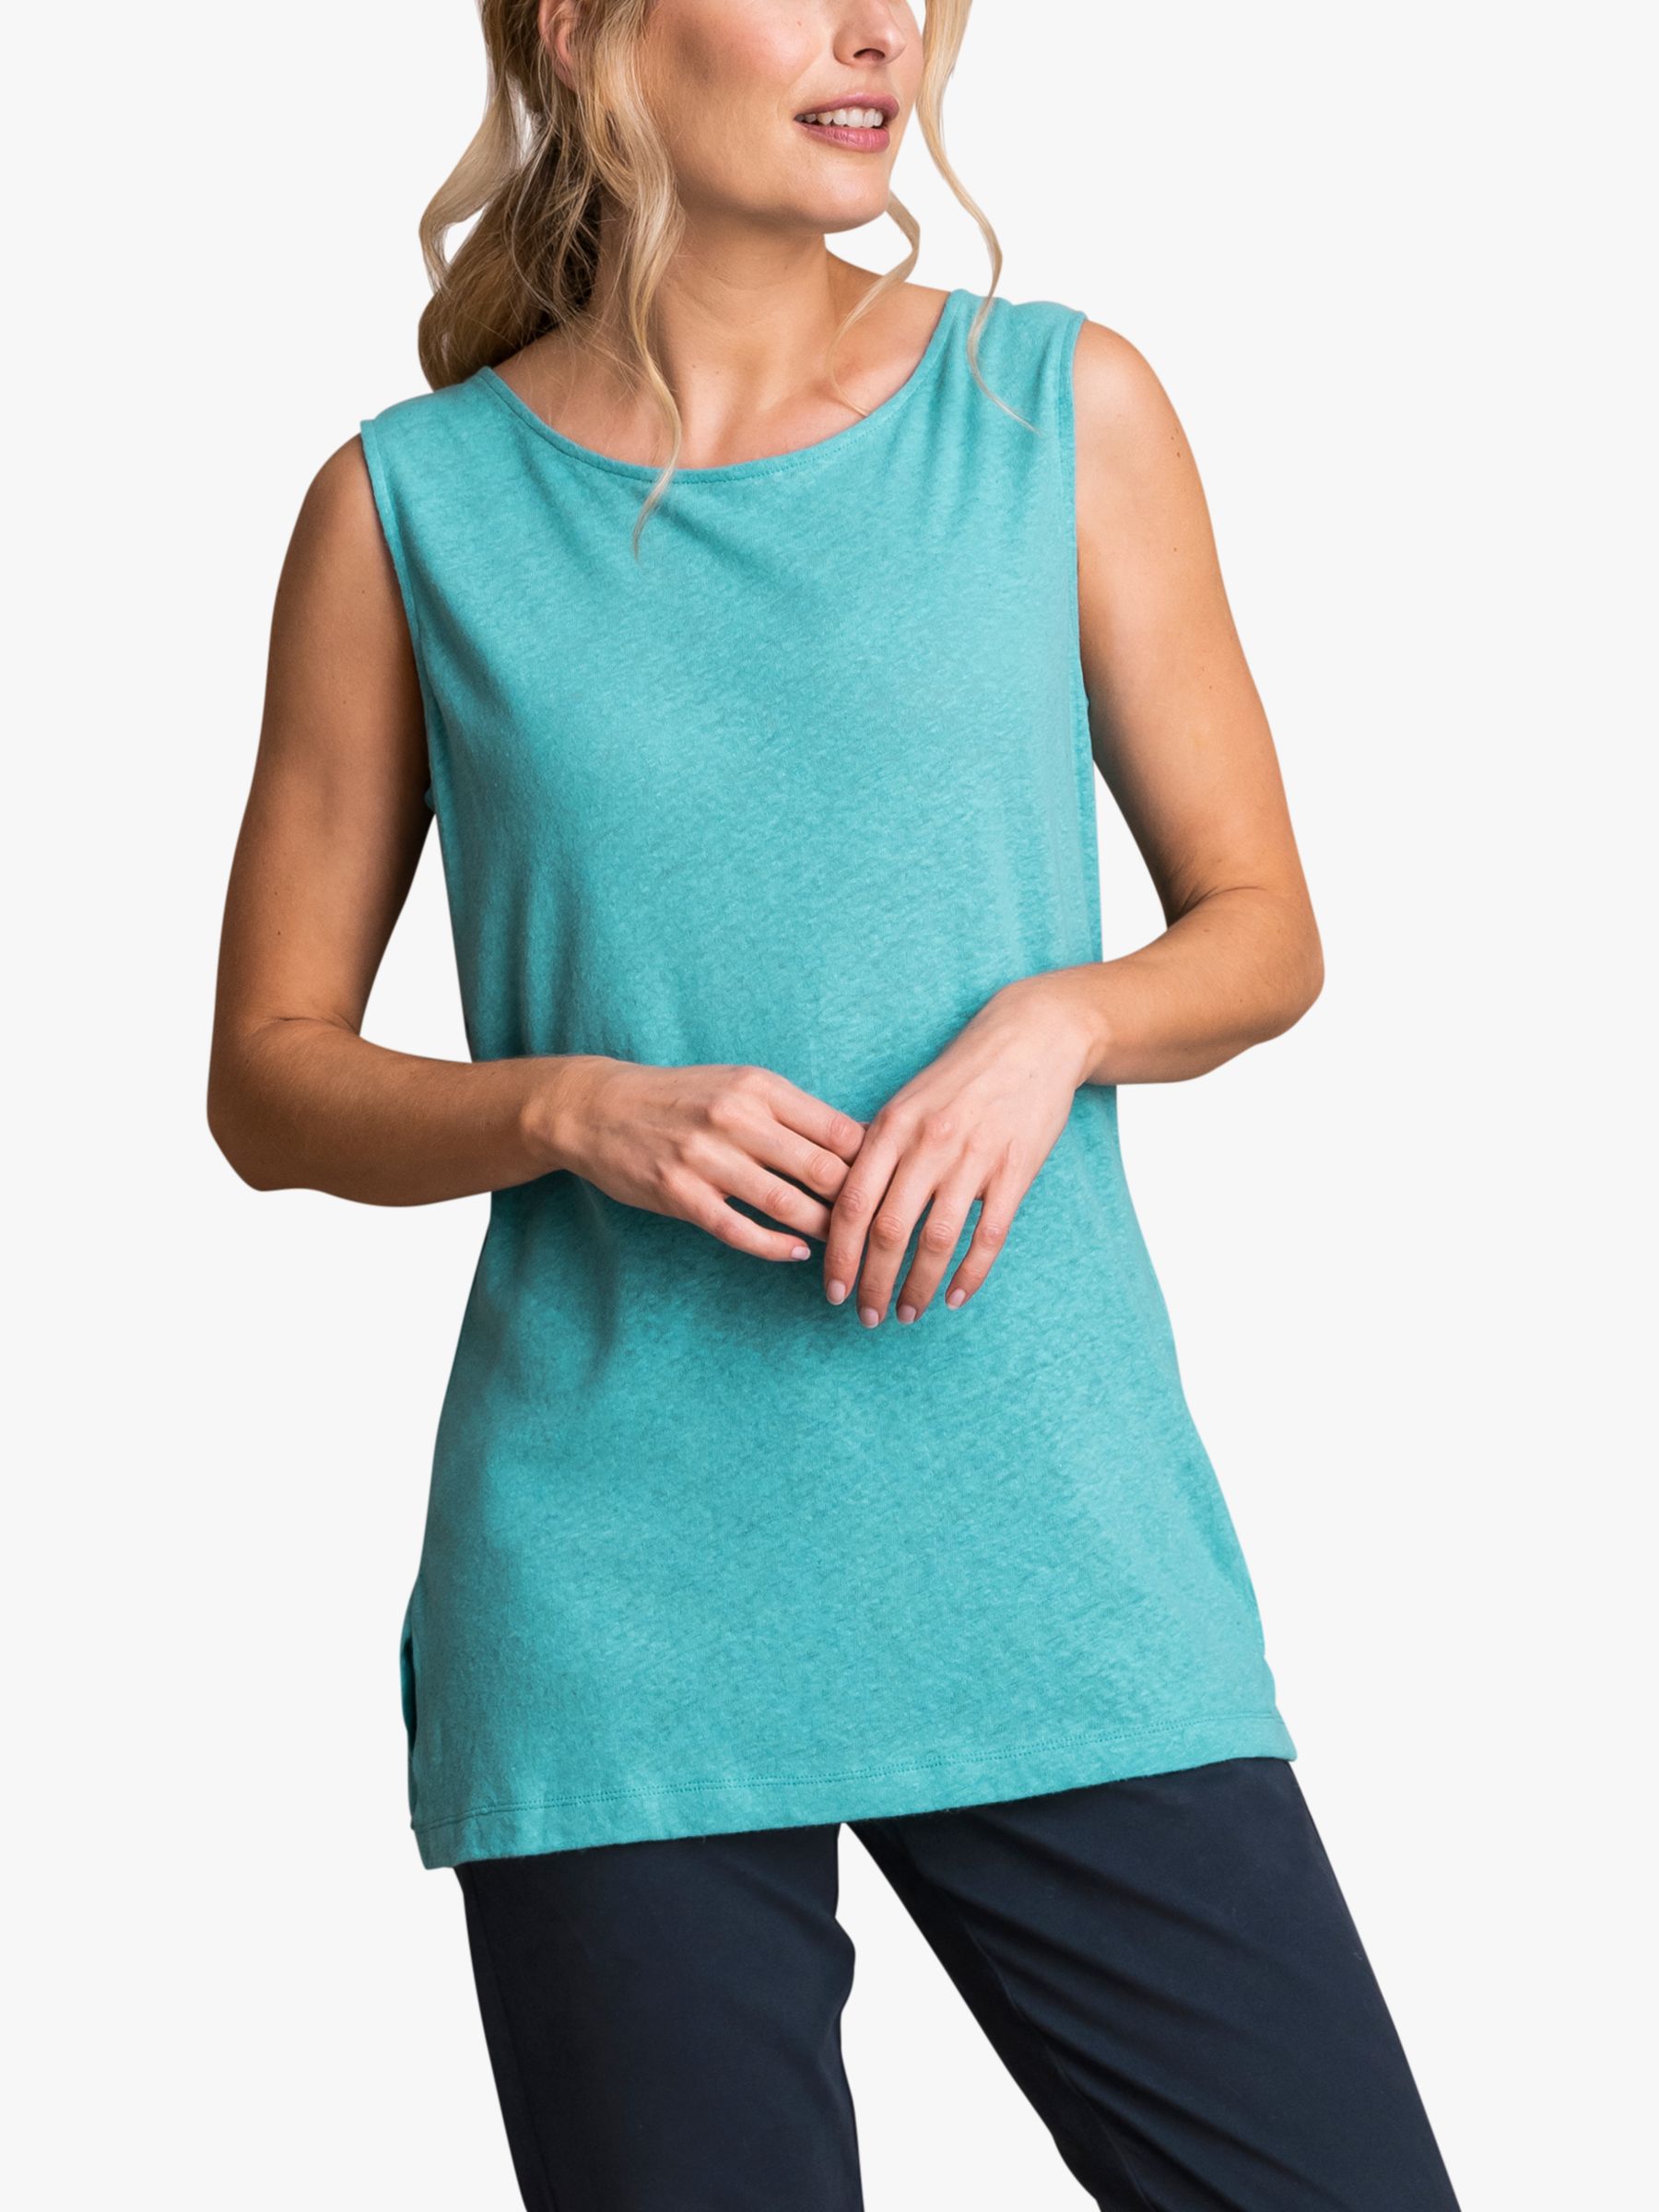 Celtic & Co. Linen and Cotton Scoop Neck Tunic, Sea Glass, 8